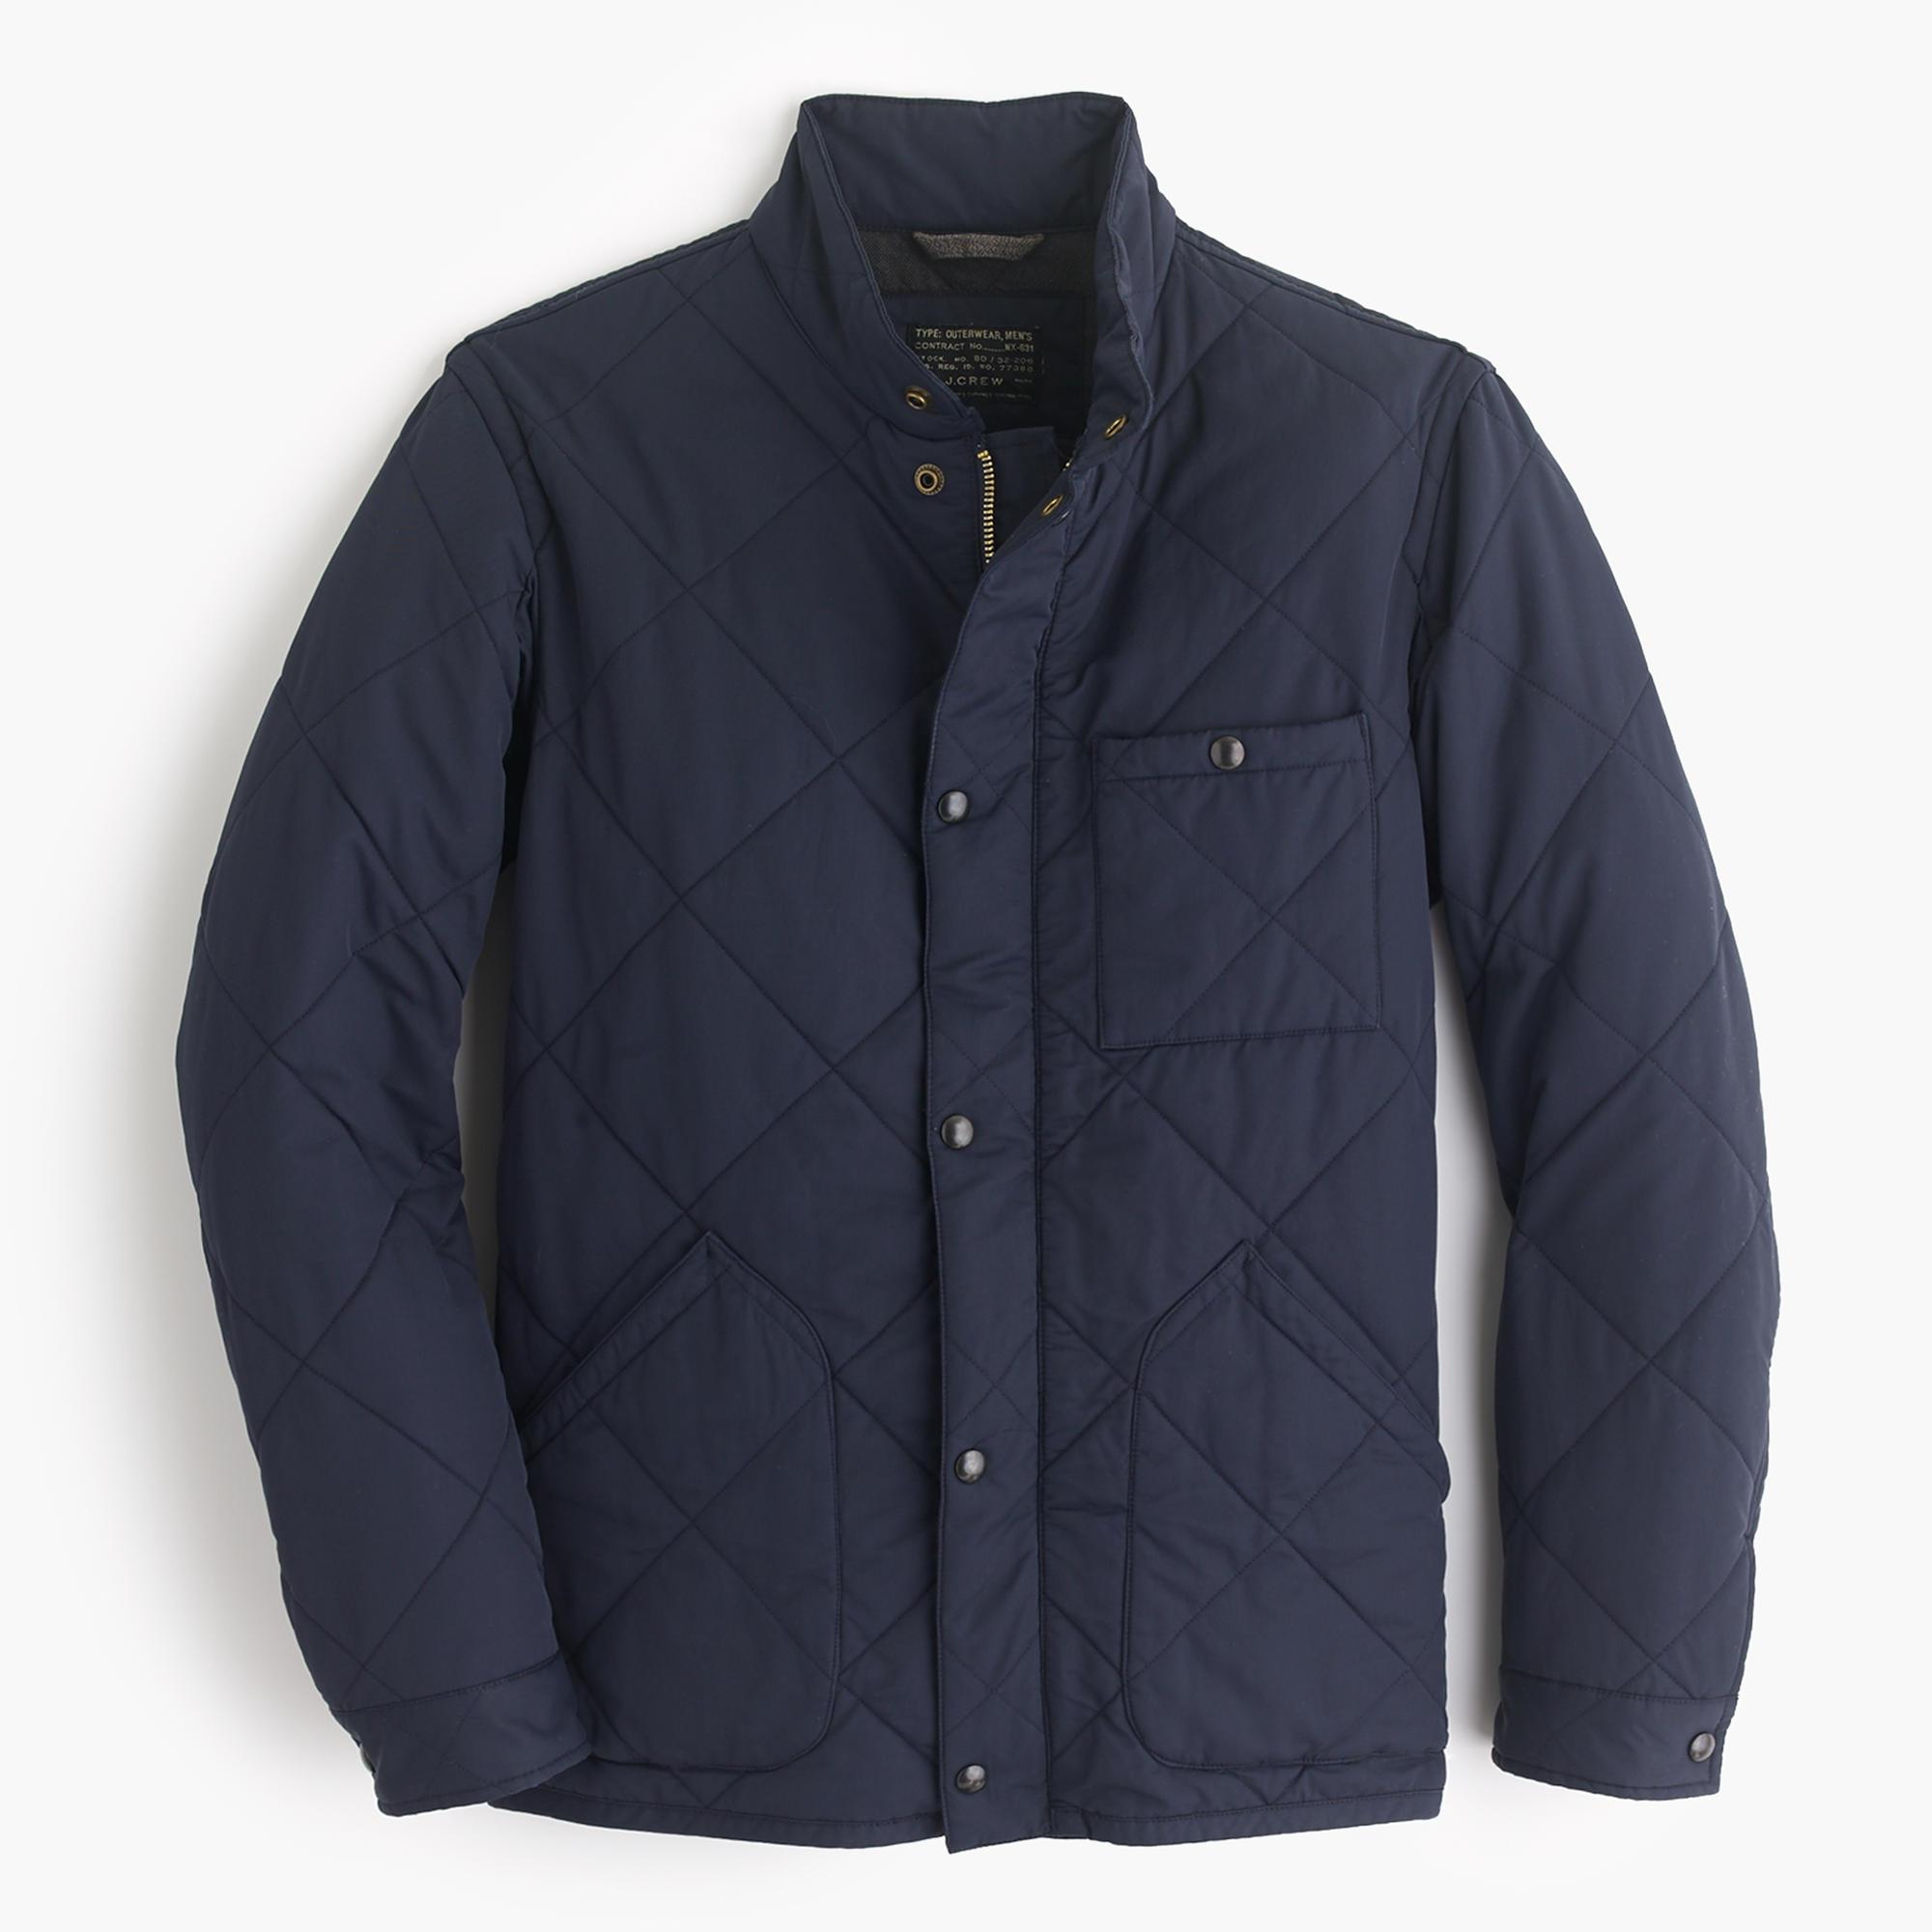 Lyst - J.Crew Sussex Quilted Jacket in Blue for Men